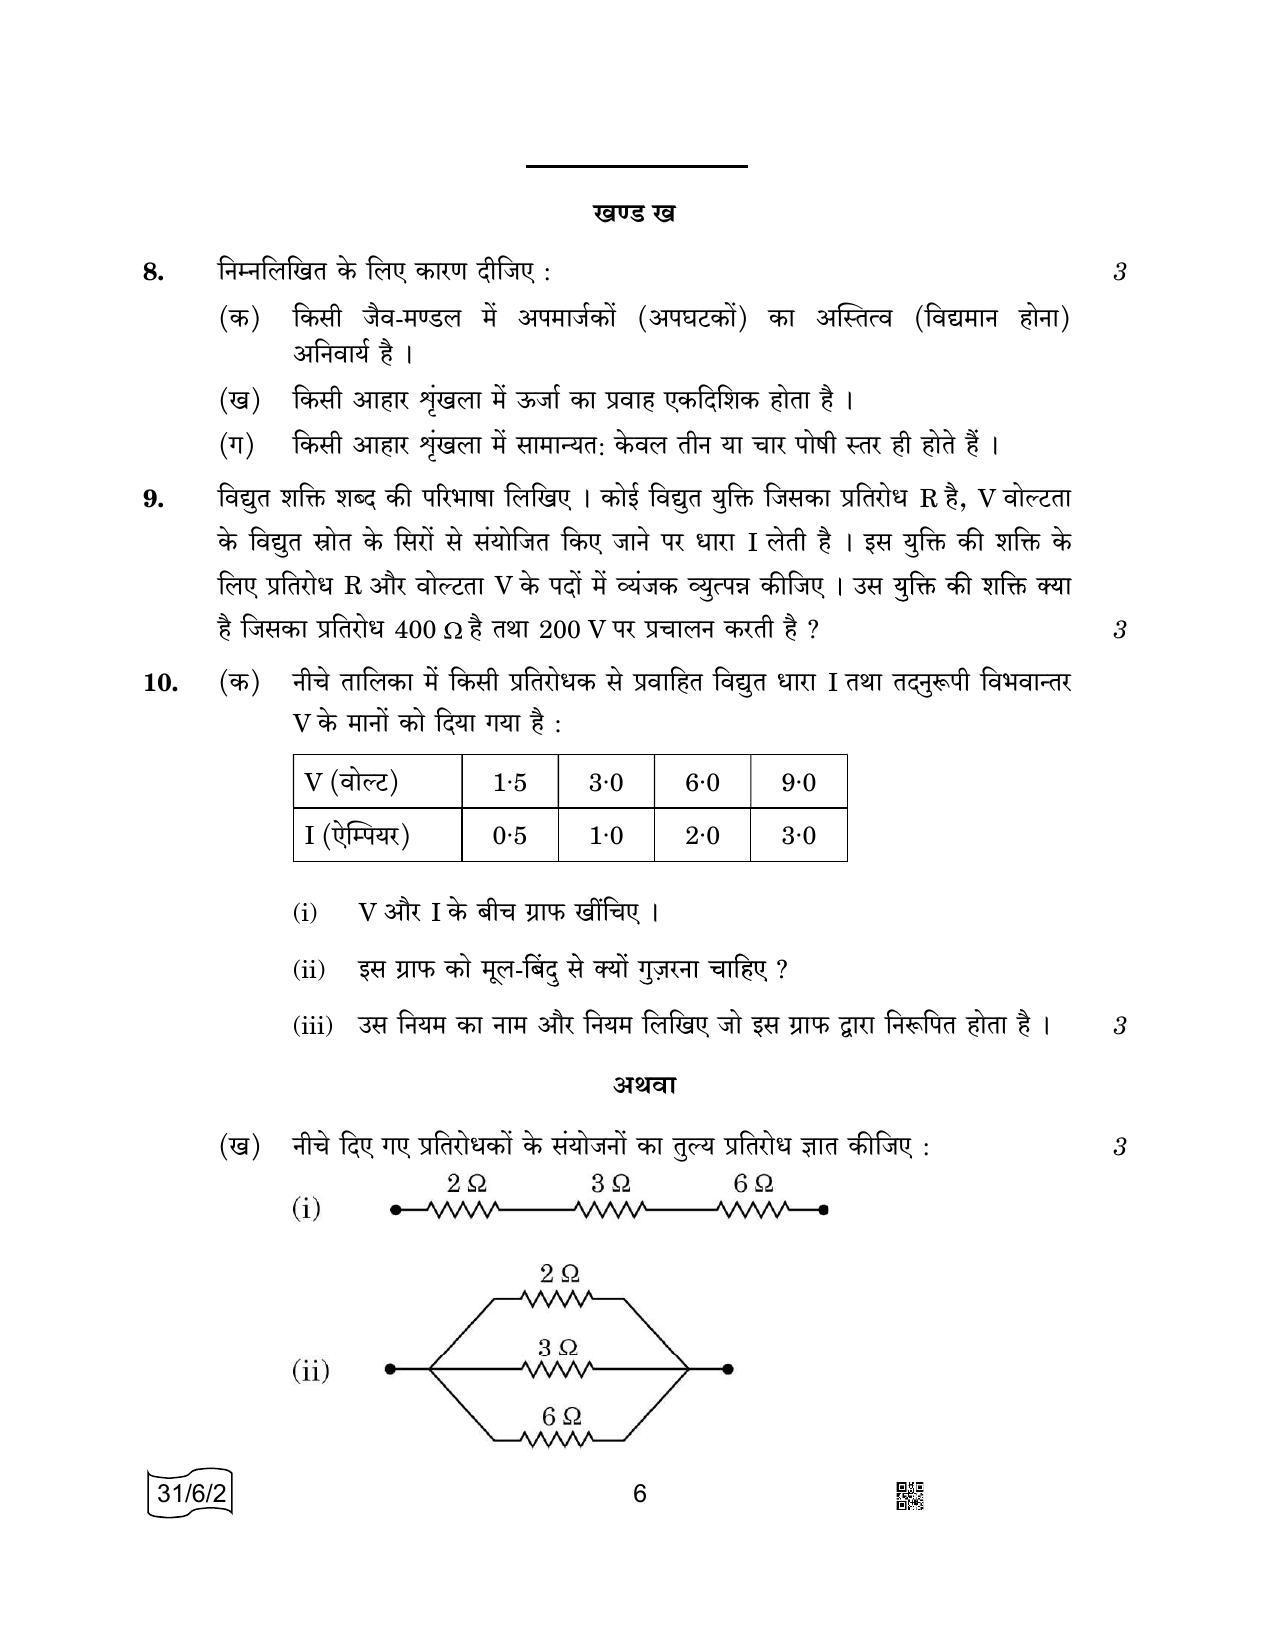 CBSE Class 10 31-6-2 SCIENCE 2022 Compartment Question Paper - Page 6